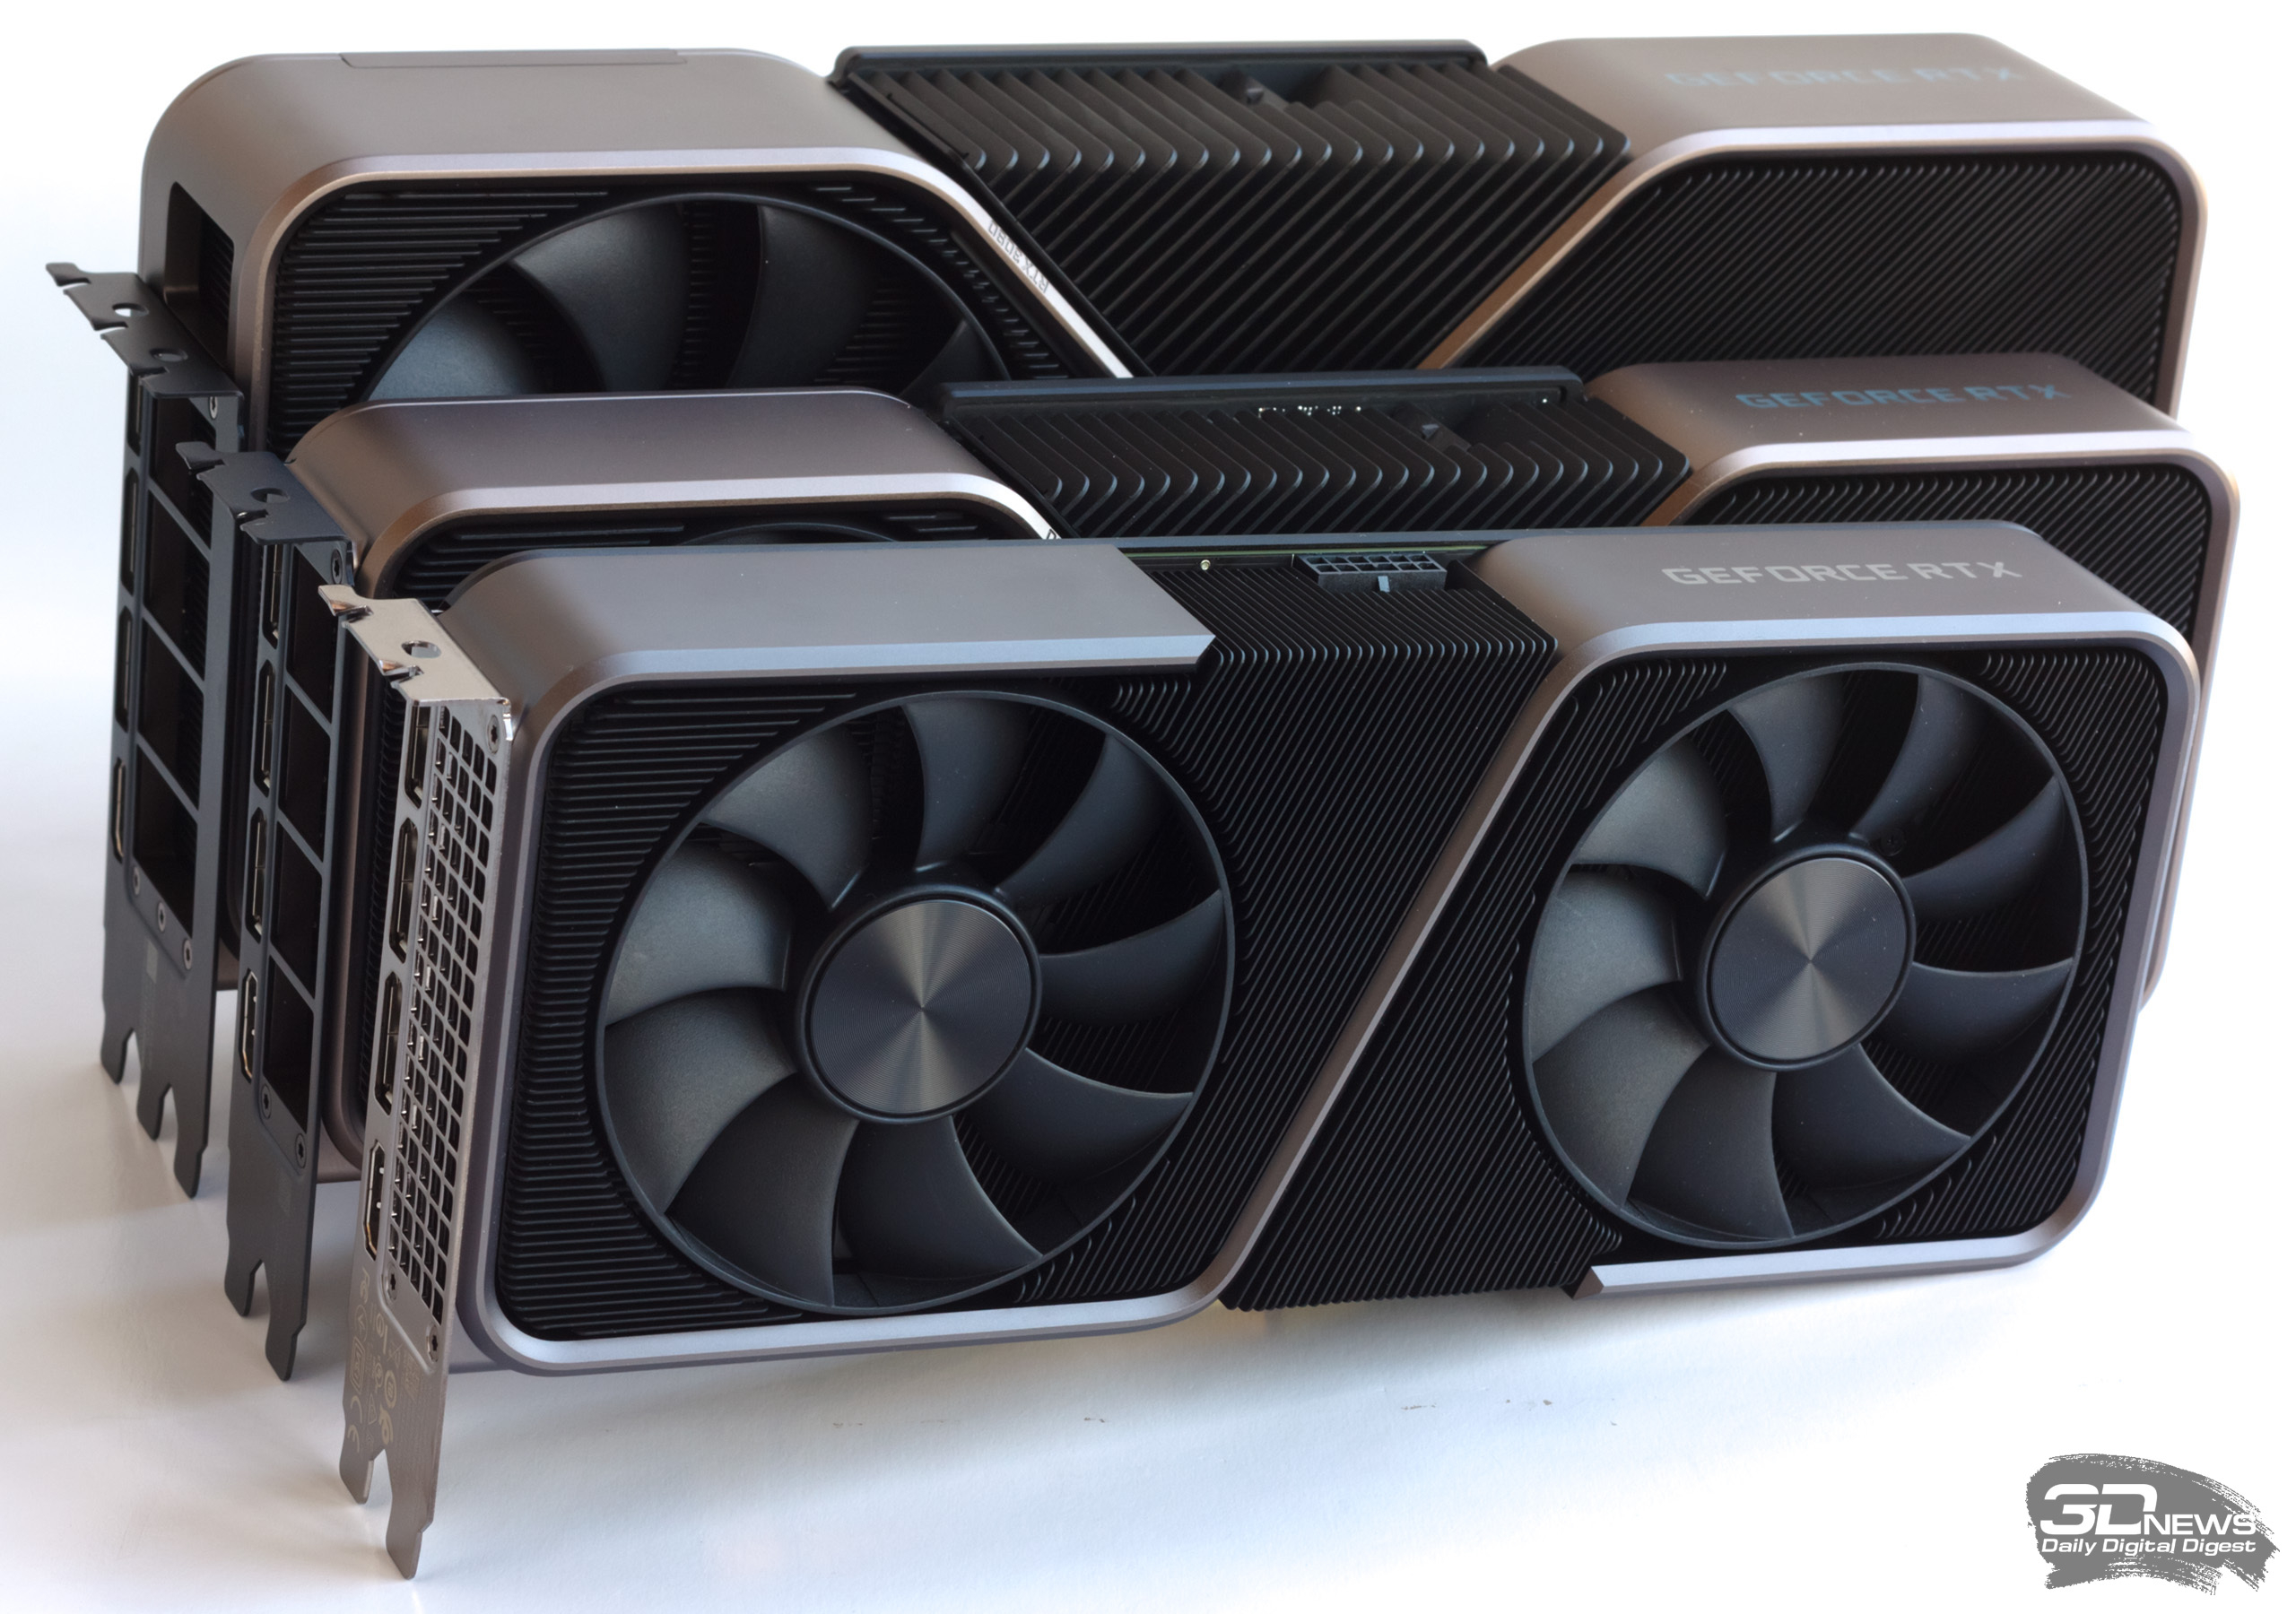 3070 founders edition. RTX 3070 founders Edition. NVIDIA RTX 3070. GEFORCE GTX 3070 ti founders Edition. RTX 3070 ti founders Edition.